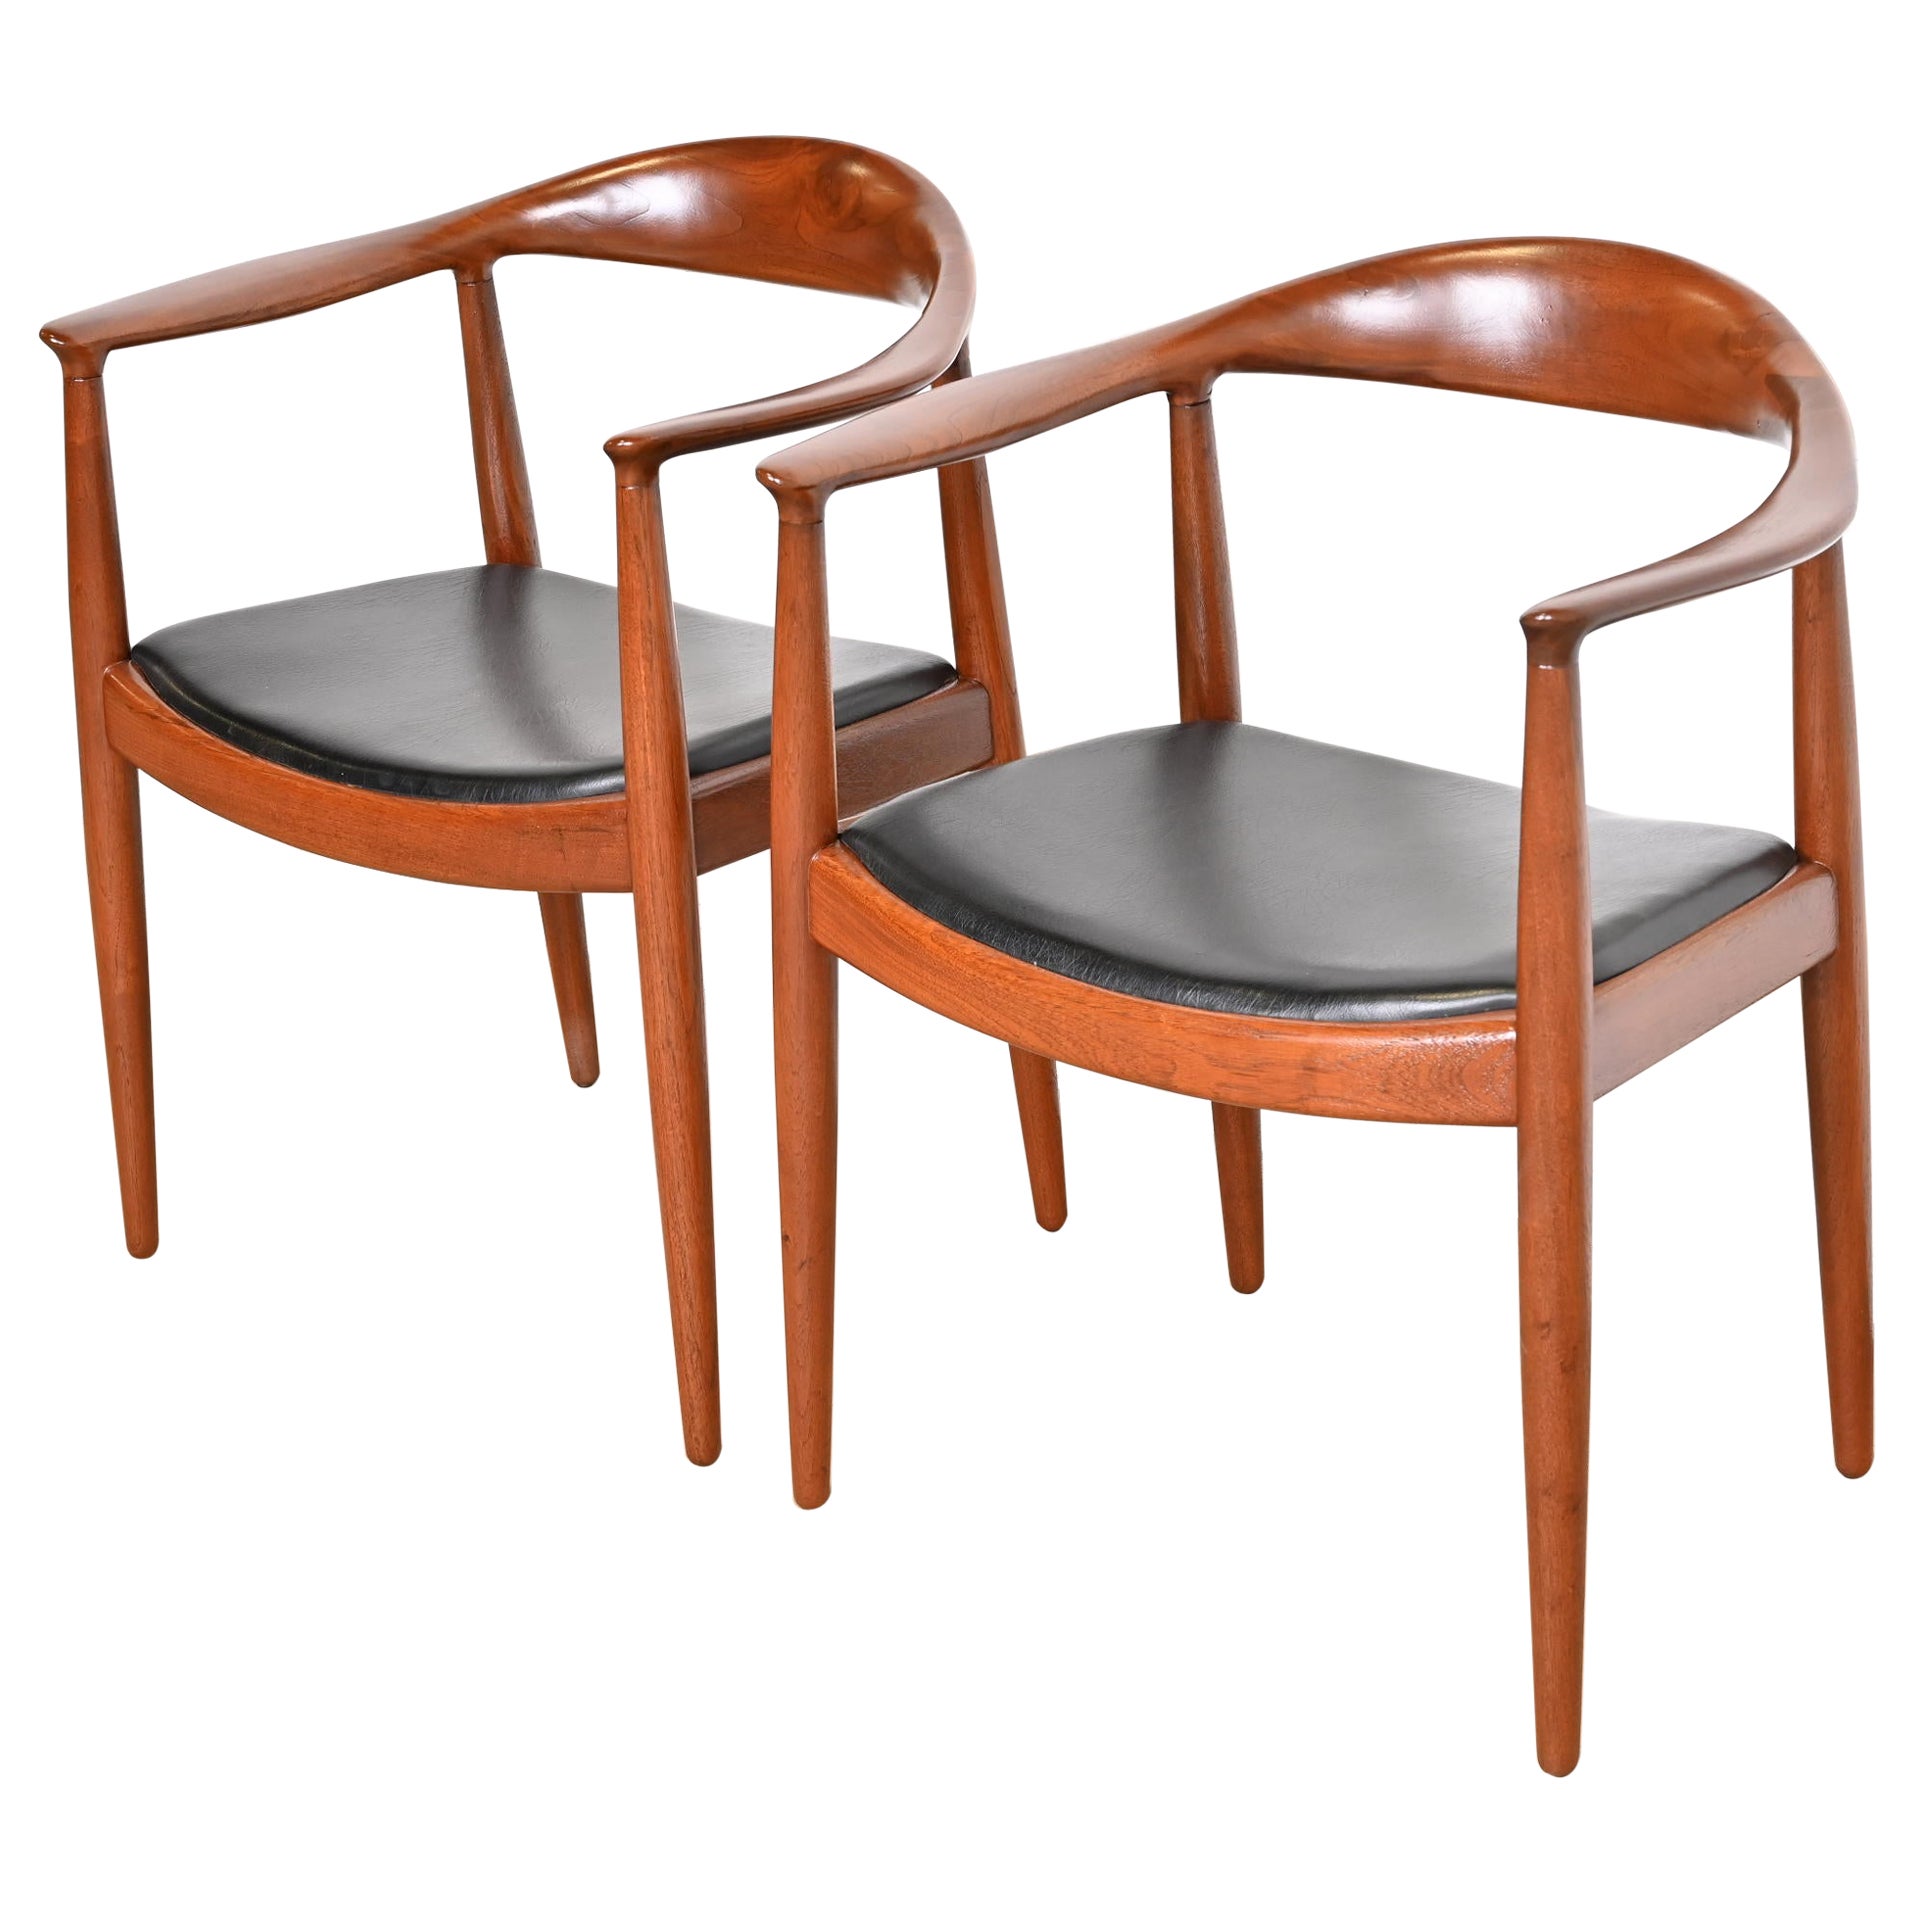 Hans Wegner for Johannes Hansen "The Chair" Teak and Leather Round Chairs, Pair For Sale